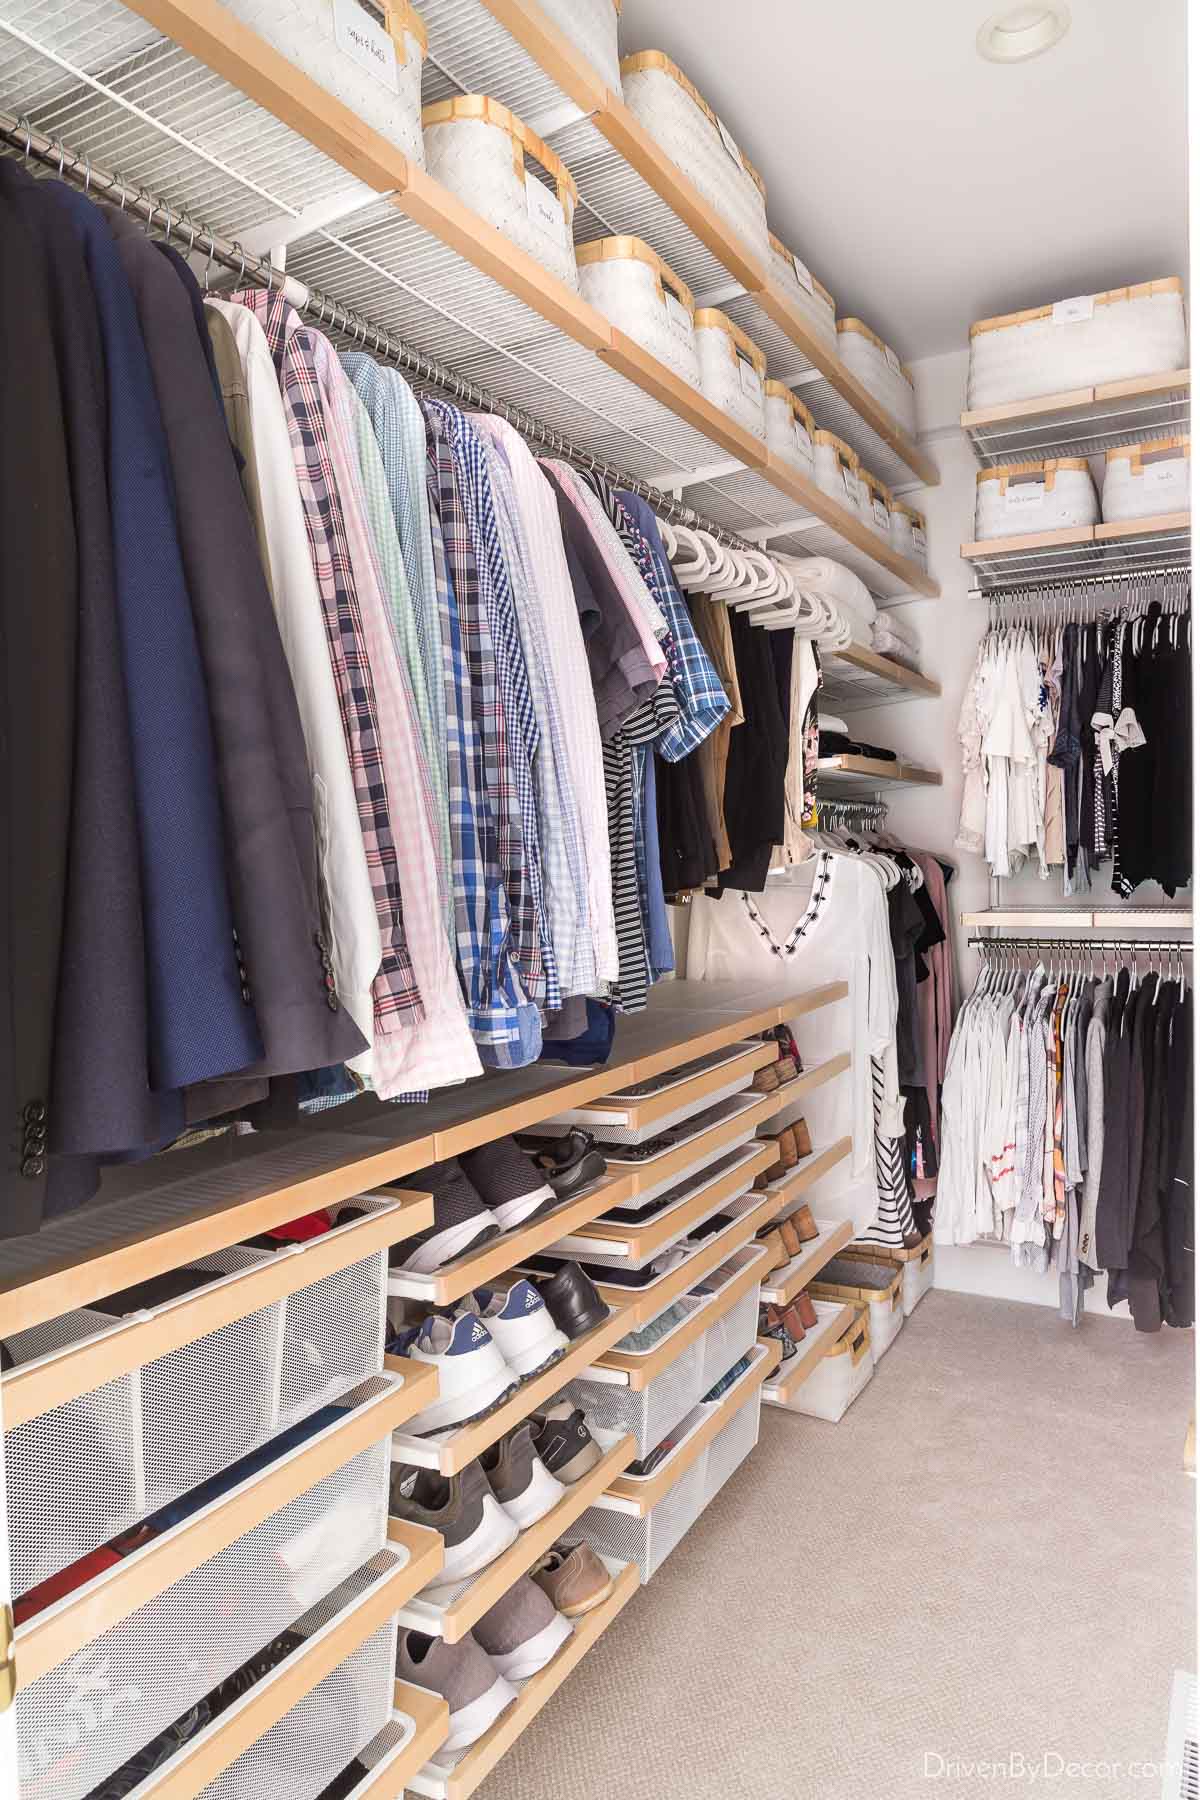 The Elfa closet system we installed in our primary closet!